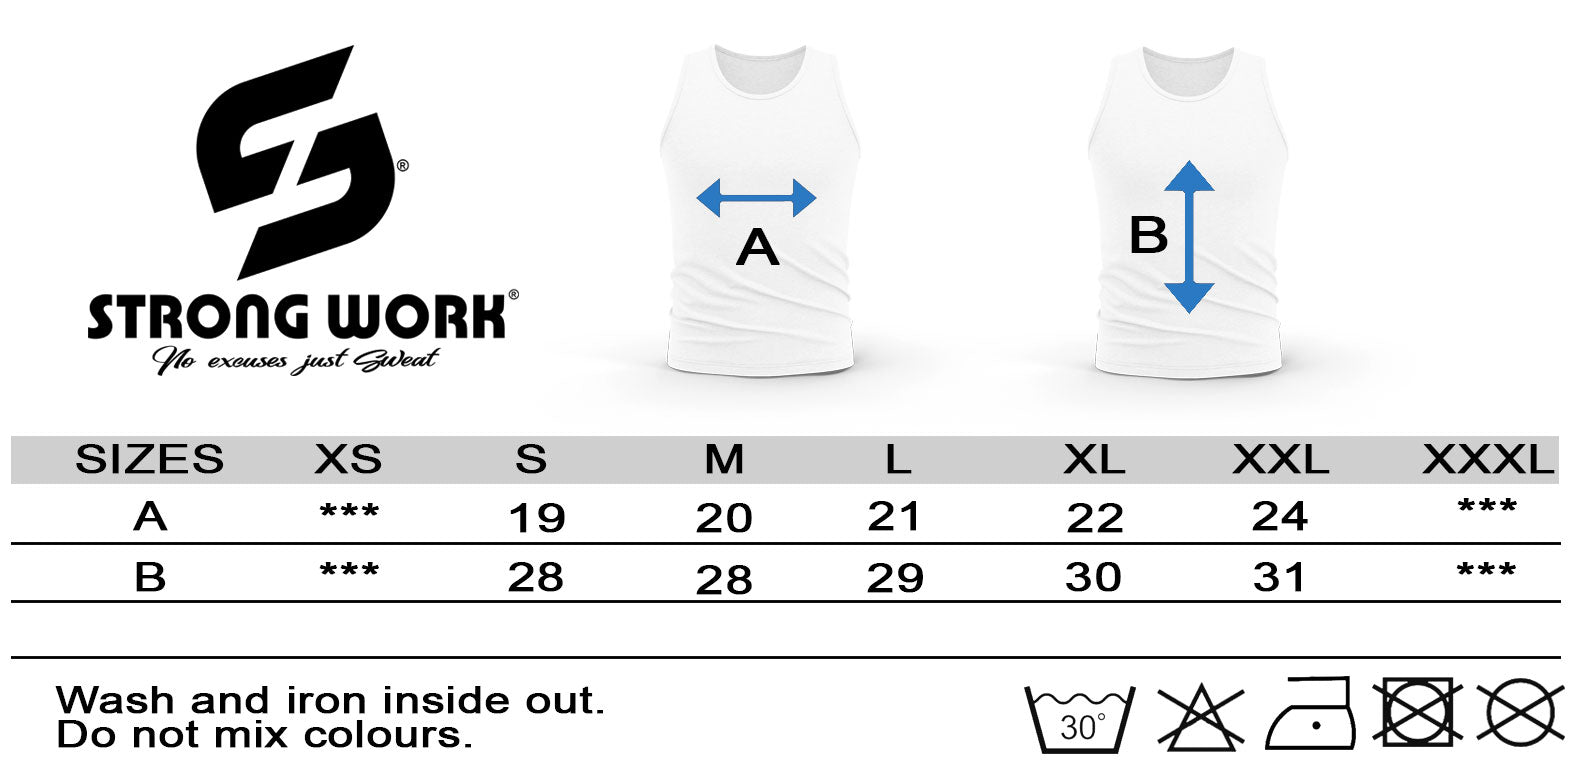 SIZE GUIDE - STRONG WORK ORIGINALS TANK TOP FOR MEN